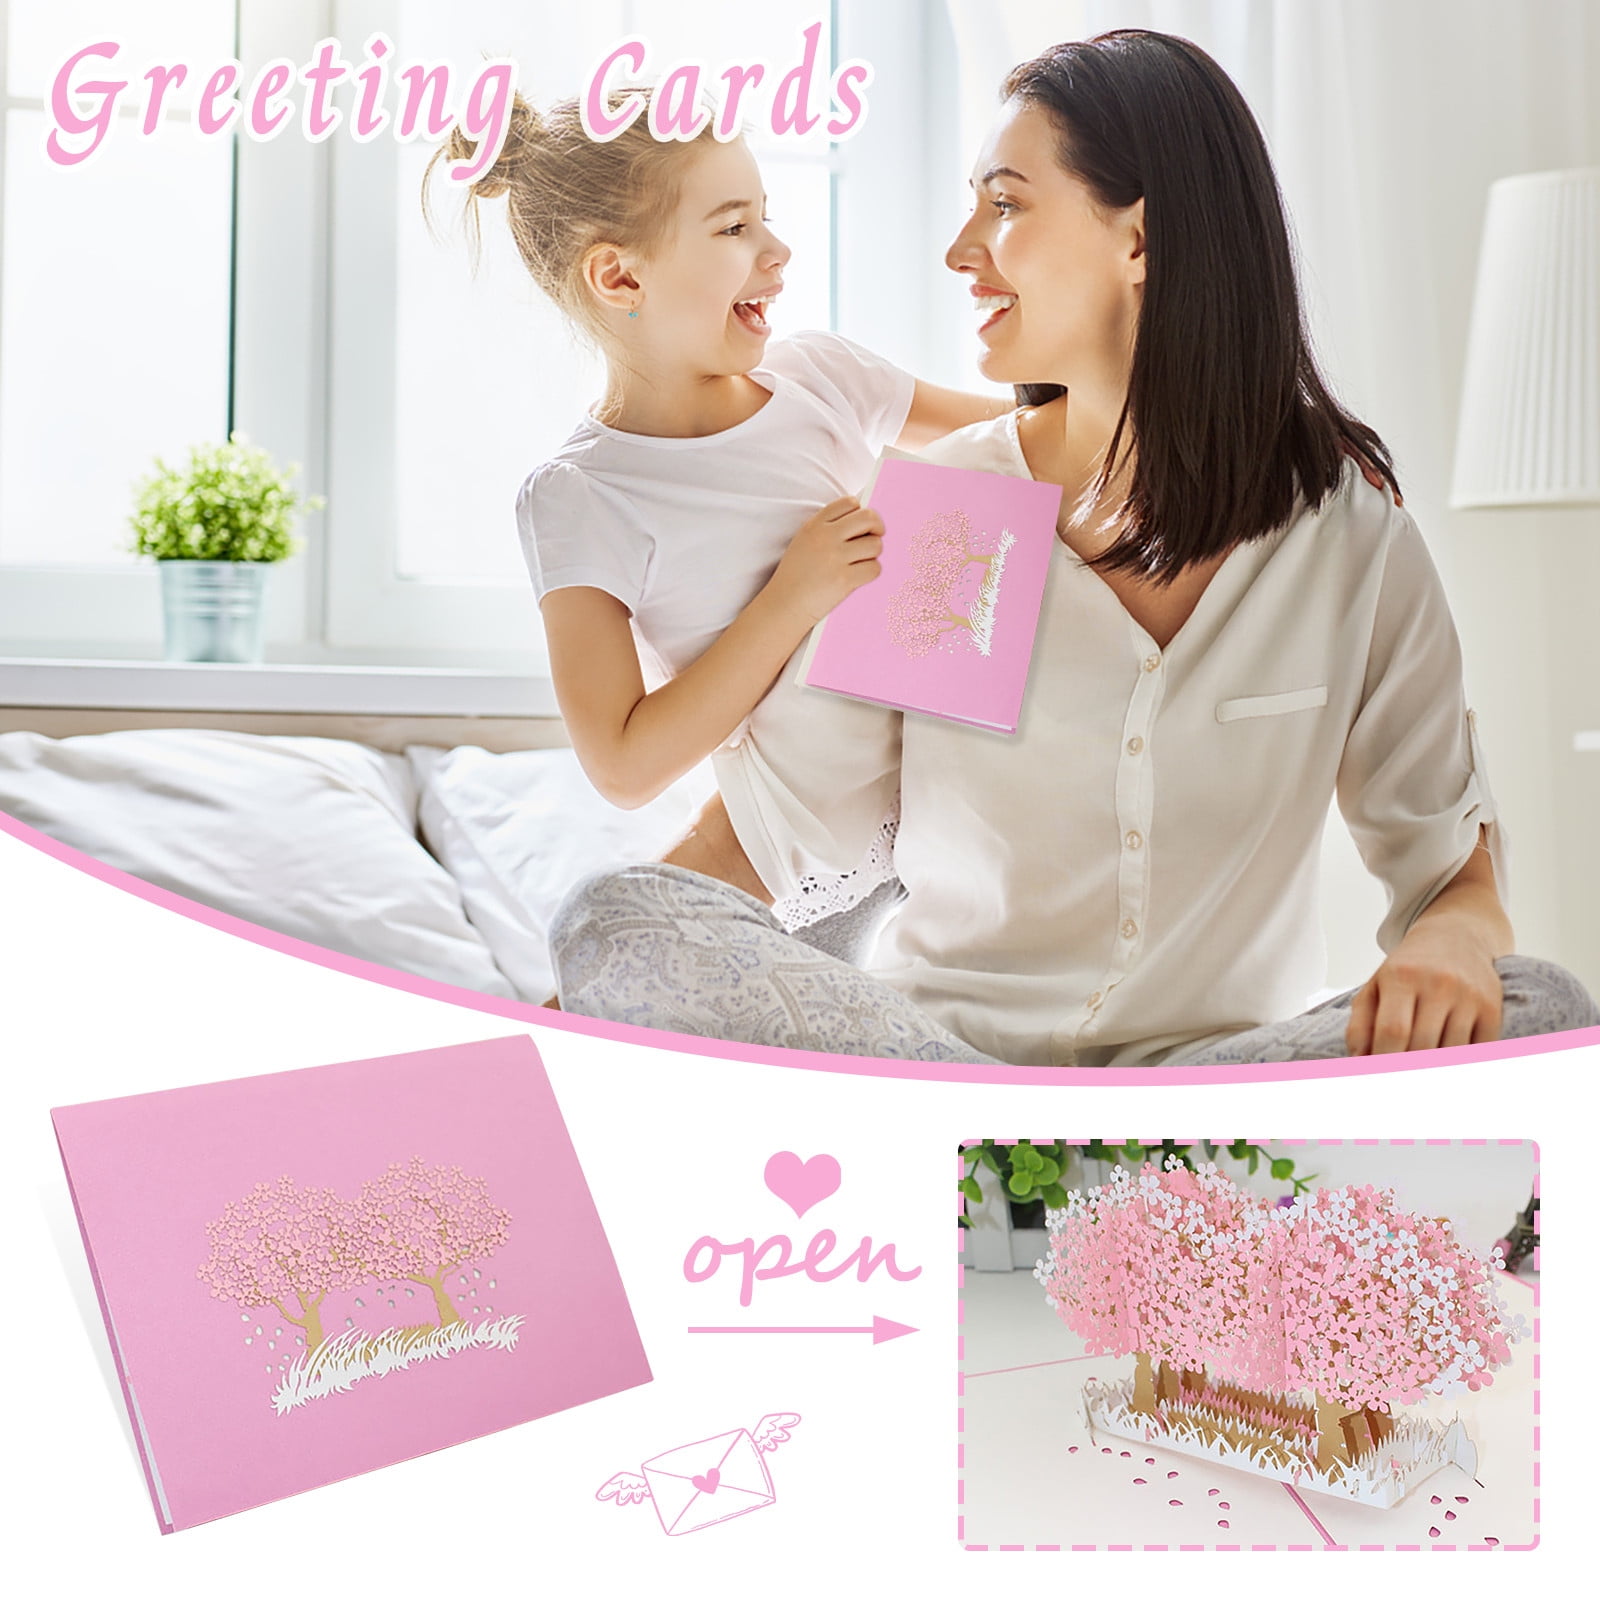 3D Yhree-Dimensional Greeting Card Paper-Cut Two-Color Beautiful Tree